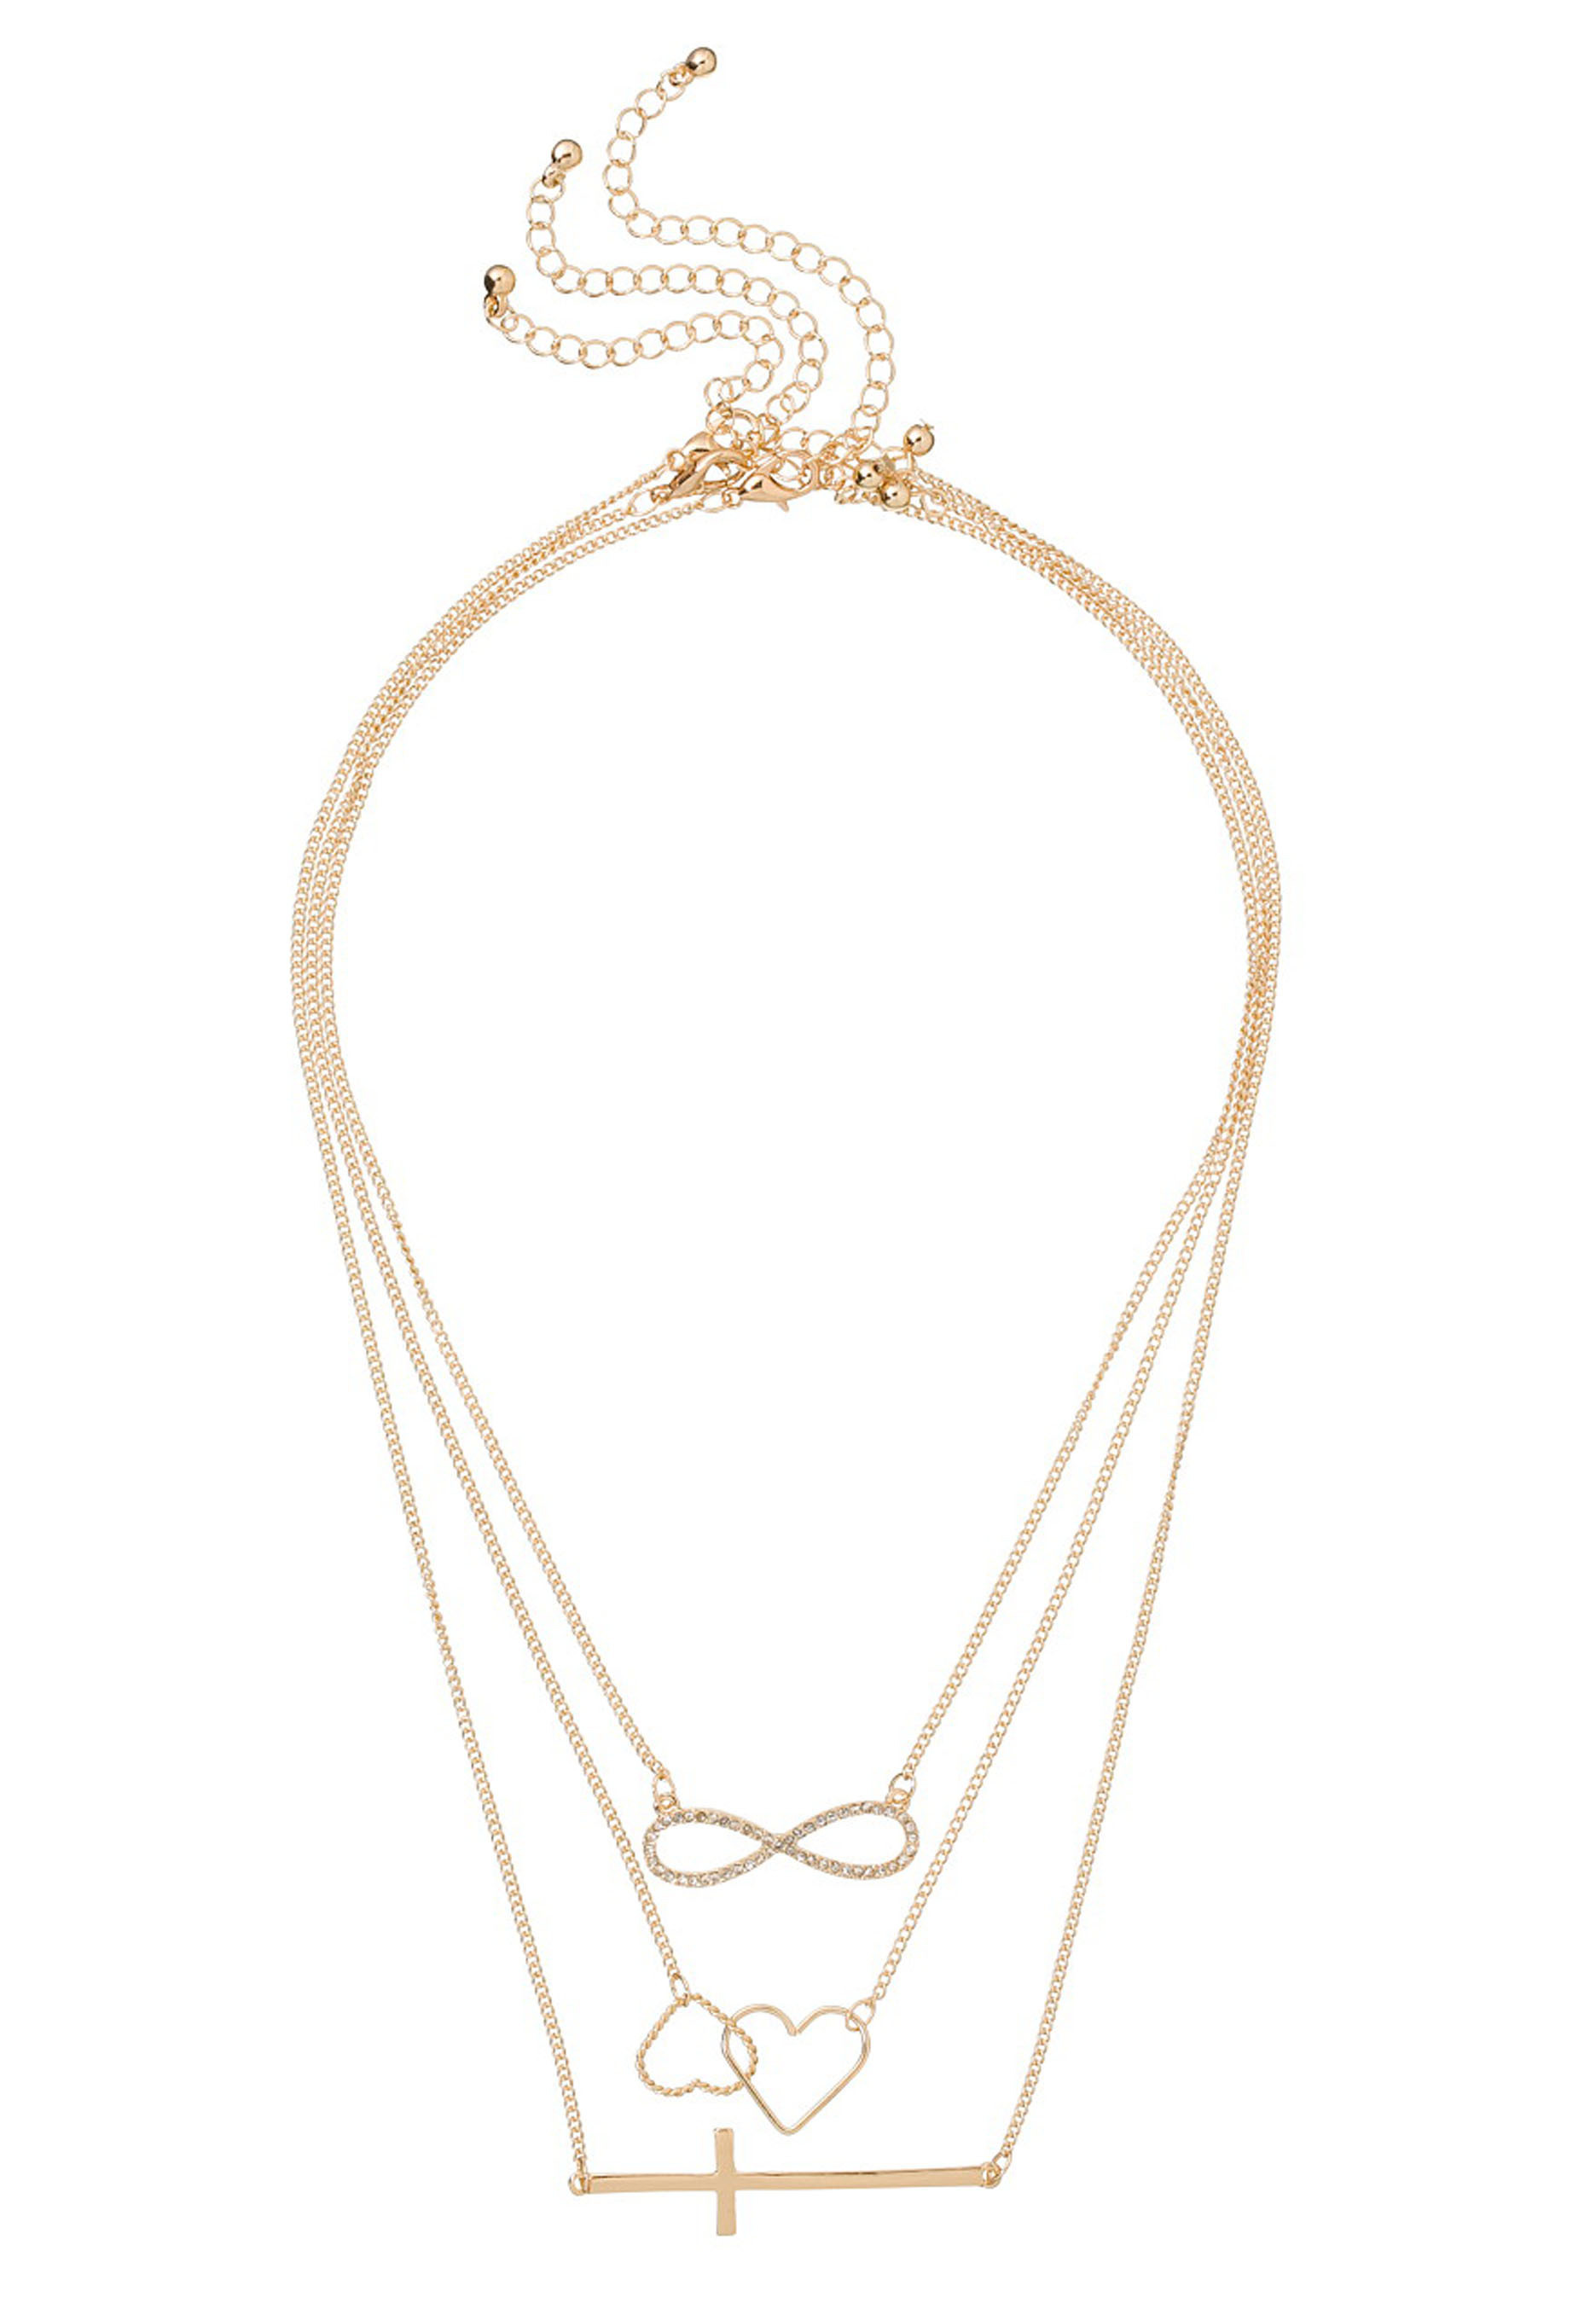 maurices continues to support American Cancer Society with new 2013 Holiday Necklace. (PRNewsFoto/maurices) (PRNewsFoto/MAURICES)